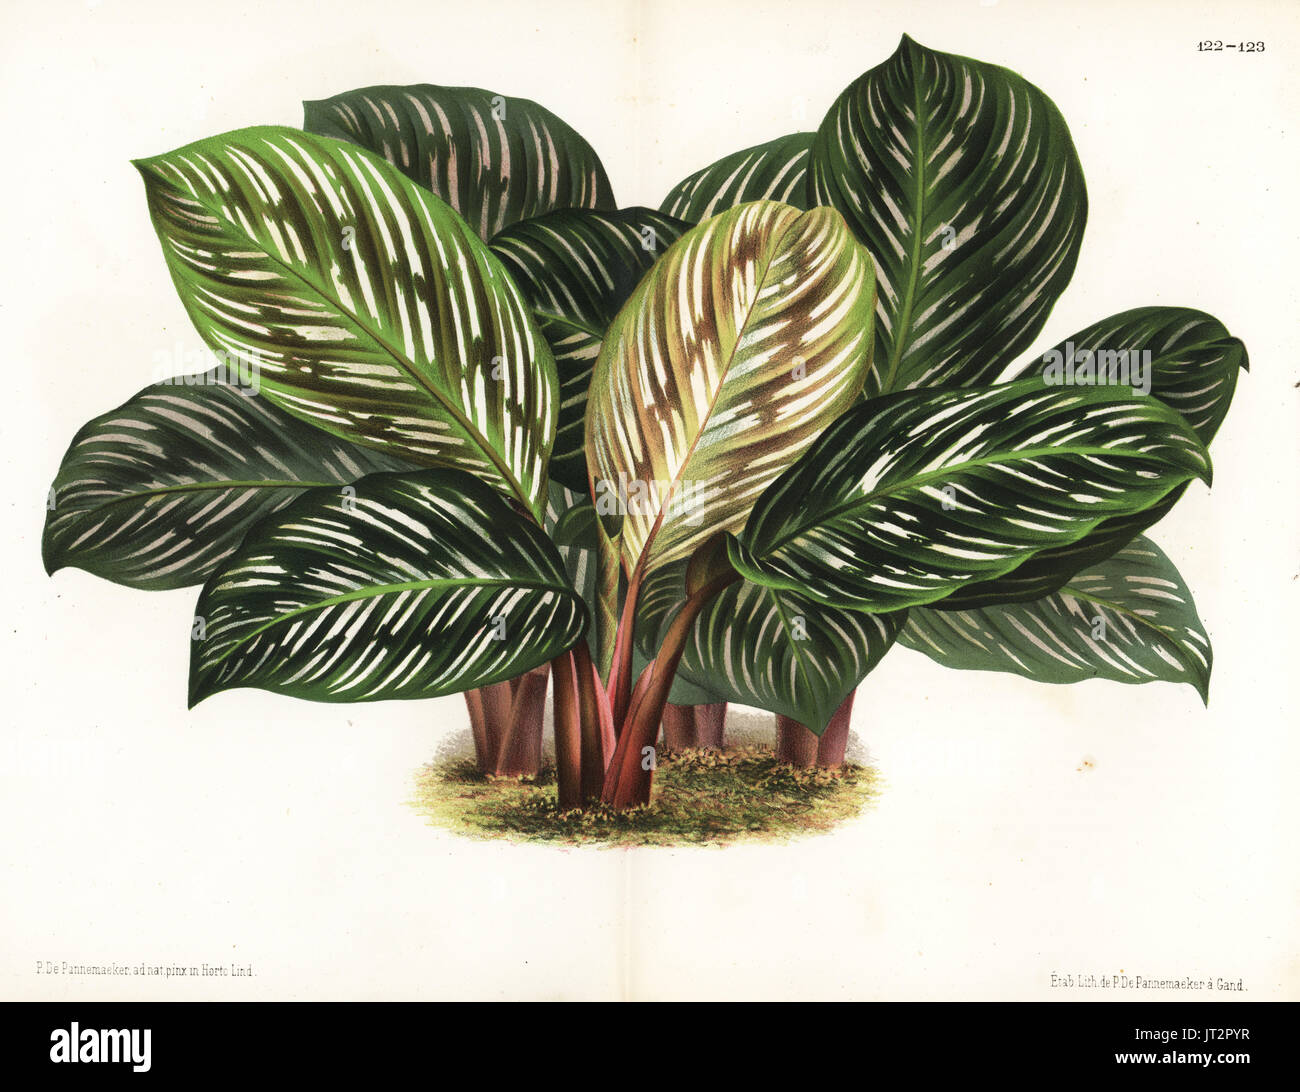 Prayer plant, Calathea hieroglyphica. Drawn and chromolithographed by P. de Pannemaeker from Jean Linden's l'Illustration Horticole, Brussels, 1873. Stock Photo